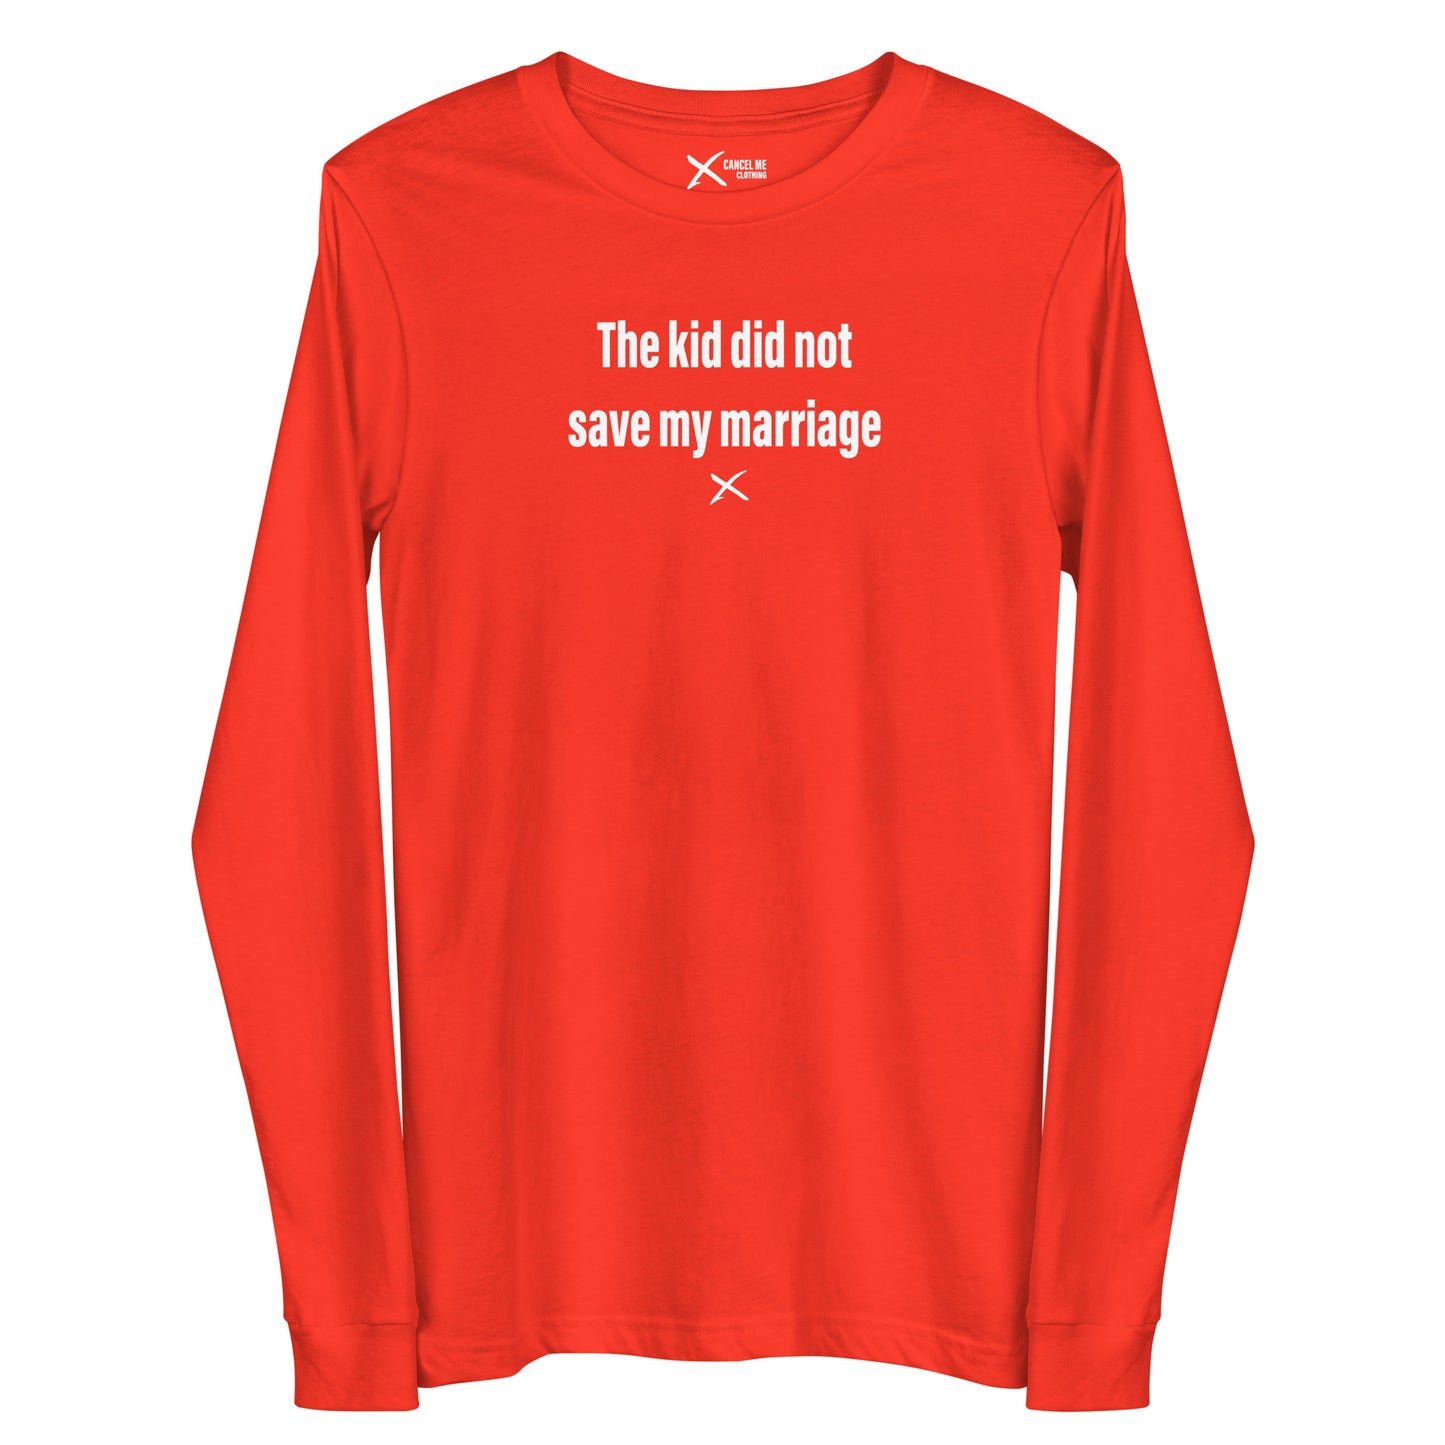 The kid did not save my marriage - Longsleeve